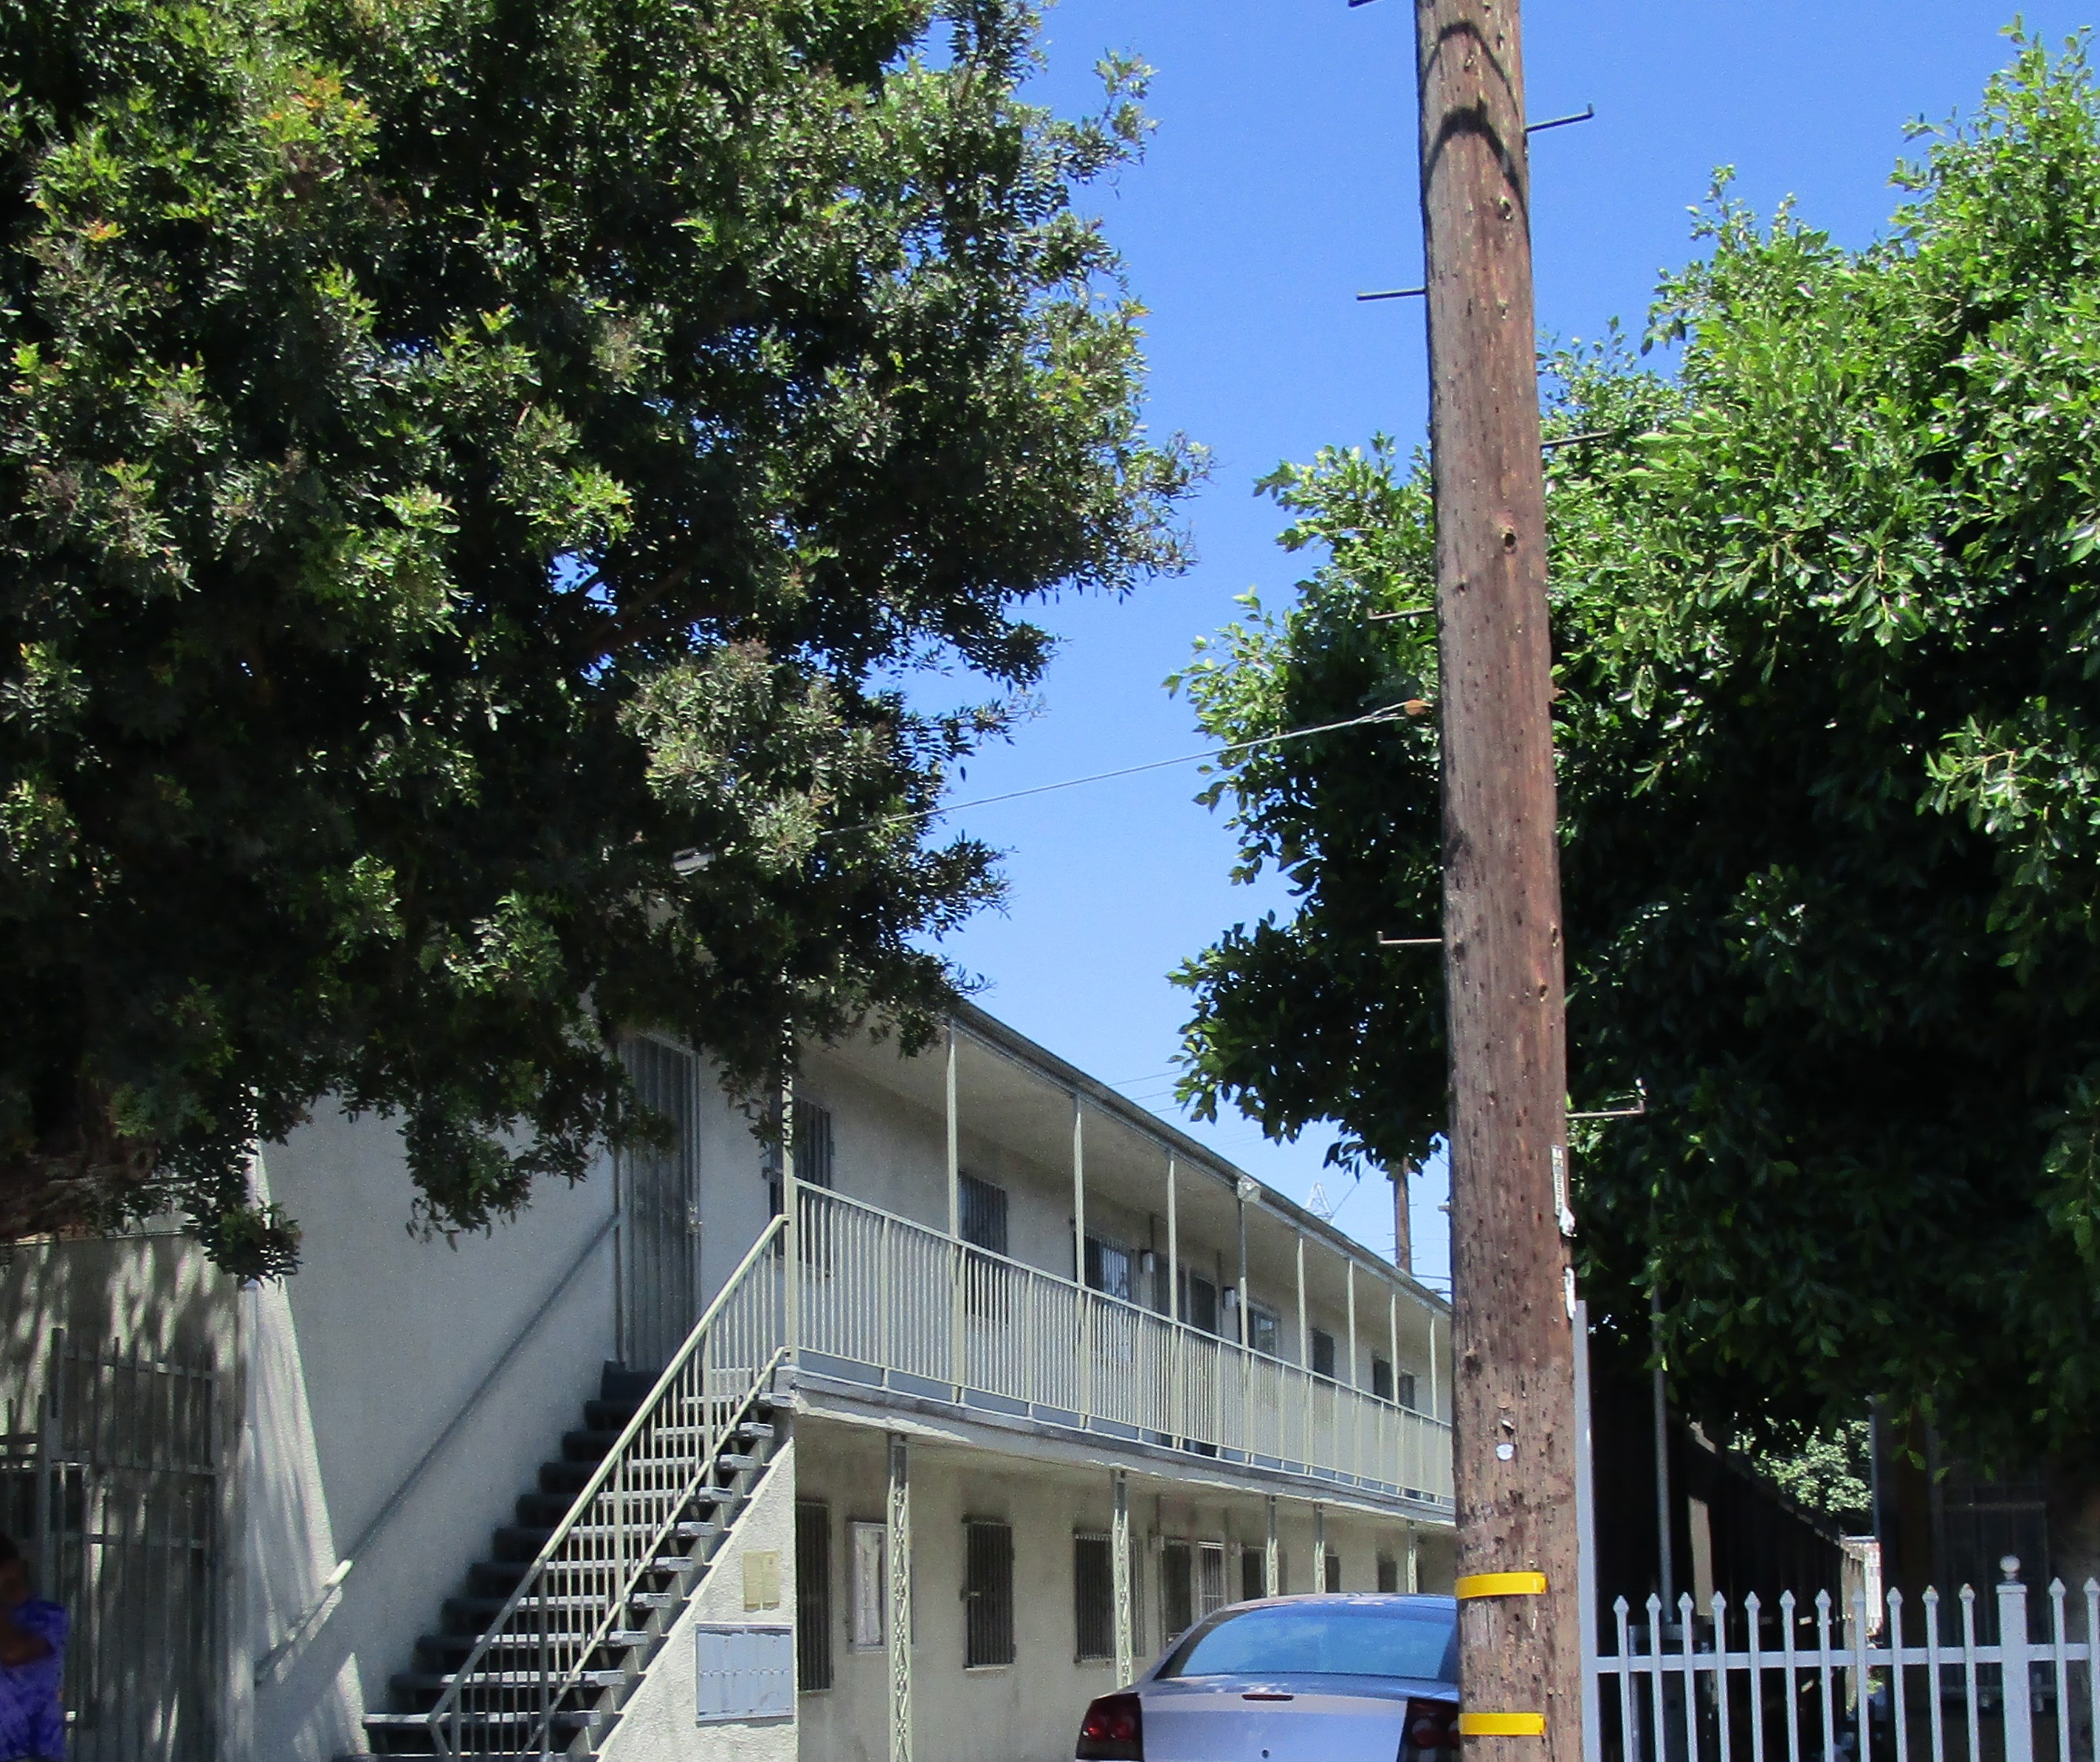 Side view of a white two story building open, no walls, a long staircase with hand rails, a gate all along the units, Open parking entrance, parked car, a big tall tree on the right side and a light pole tree on the left side, gray mailboxes.